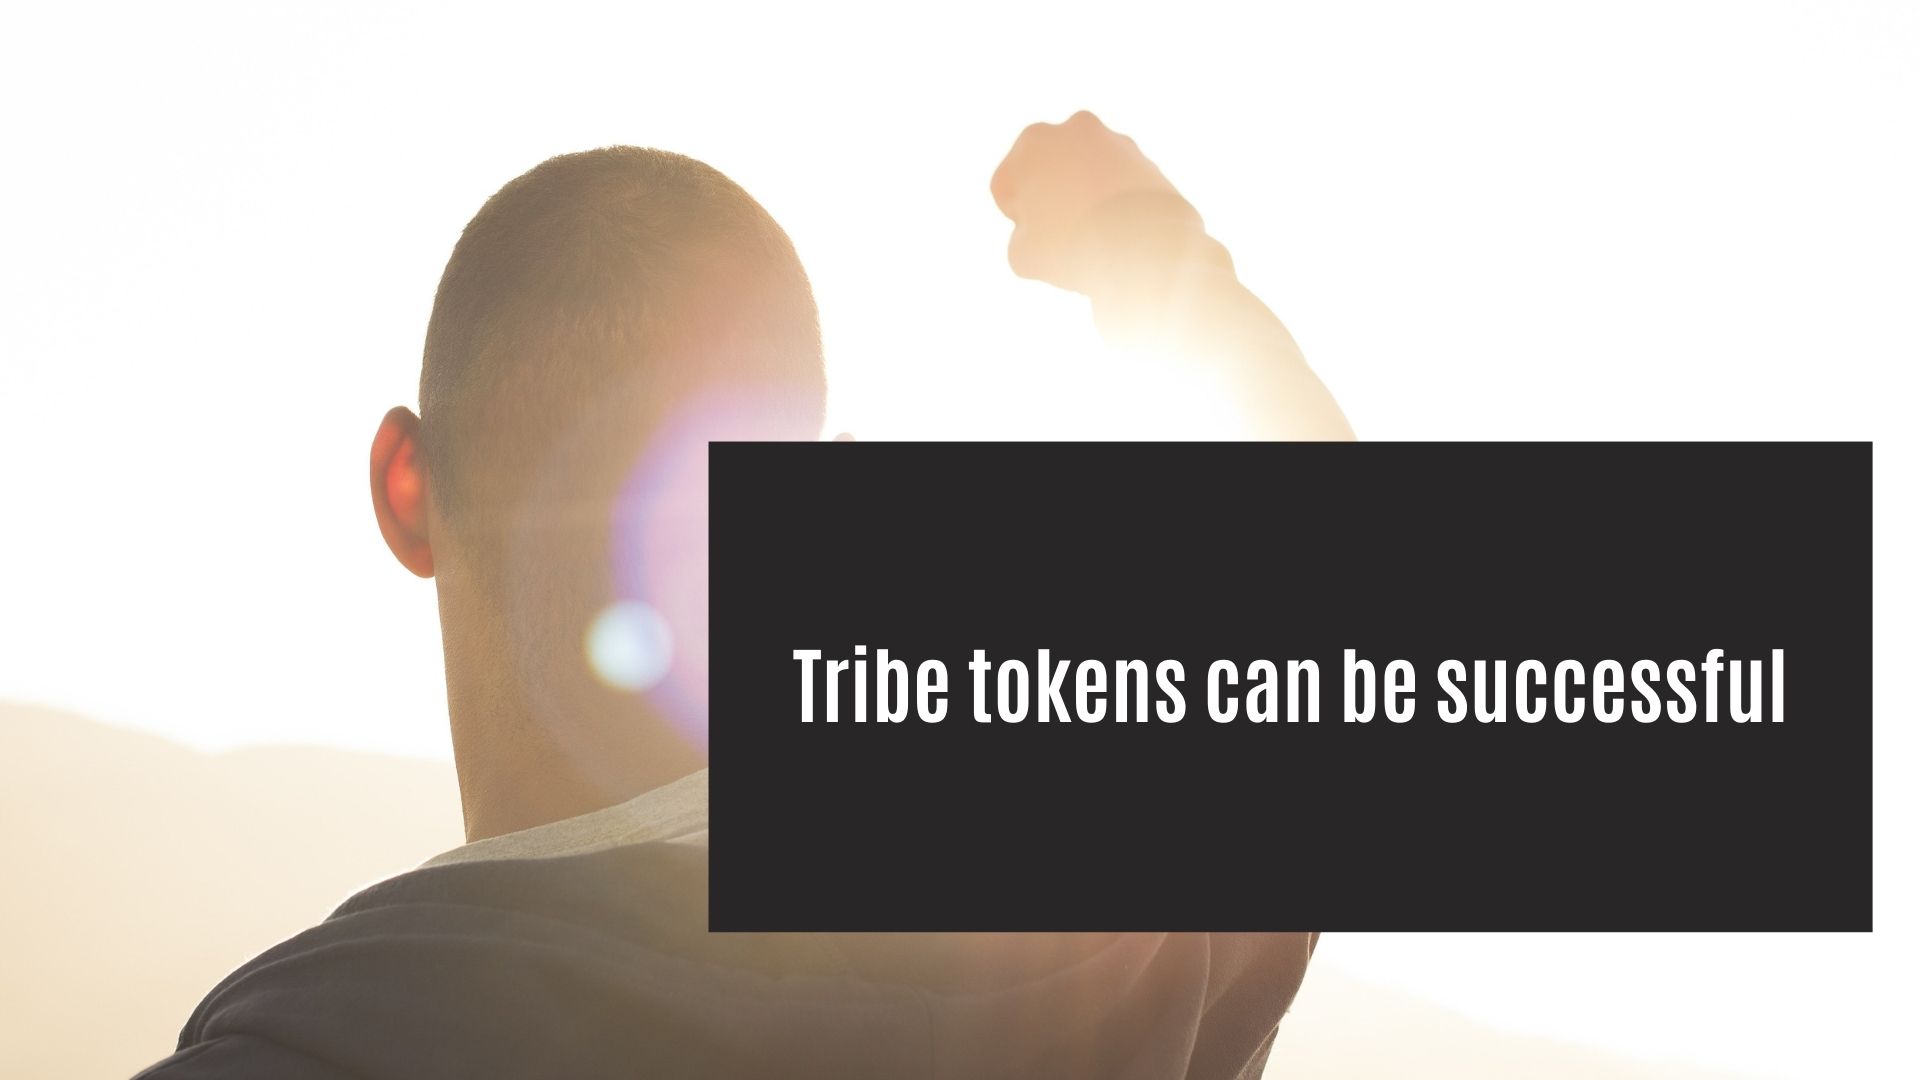 @achim03/tribe-tokens-can-be-successful